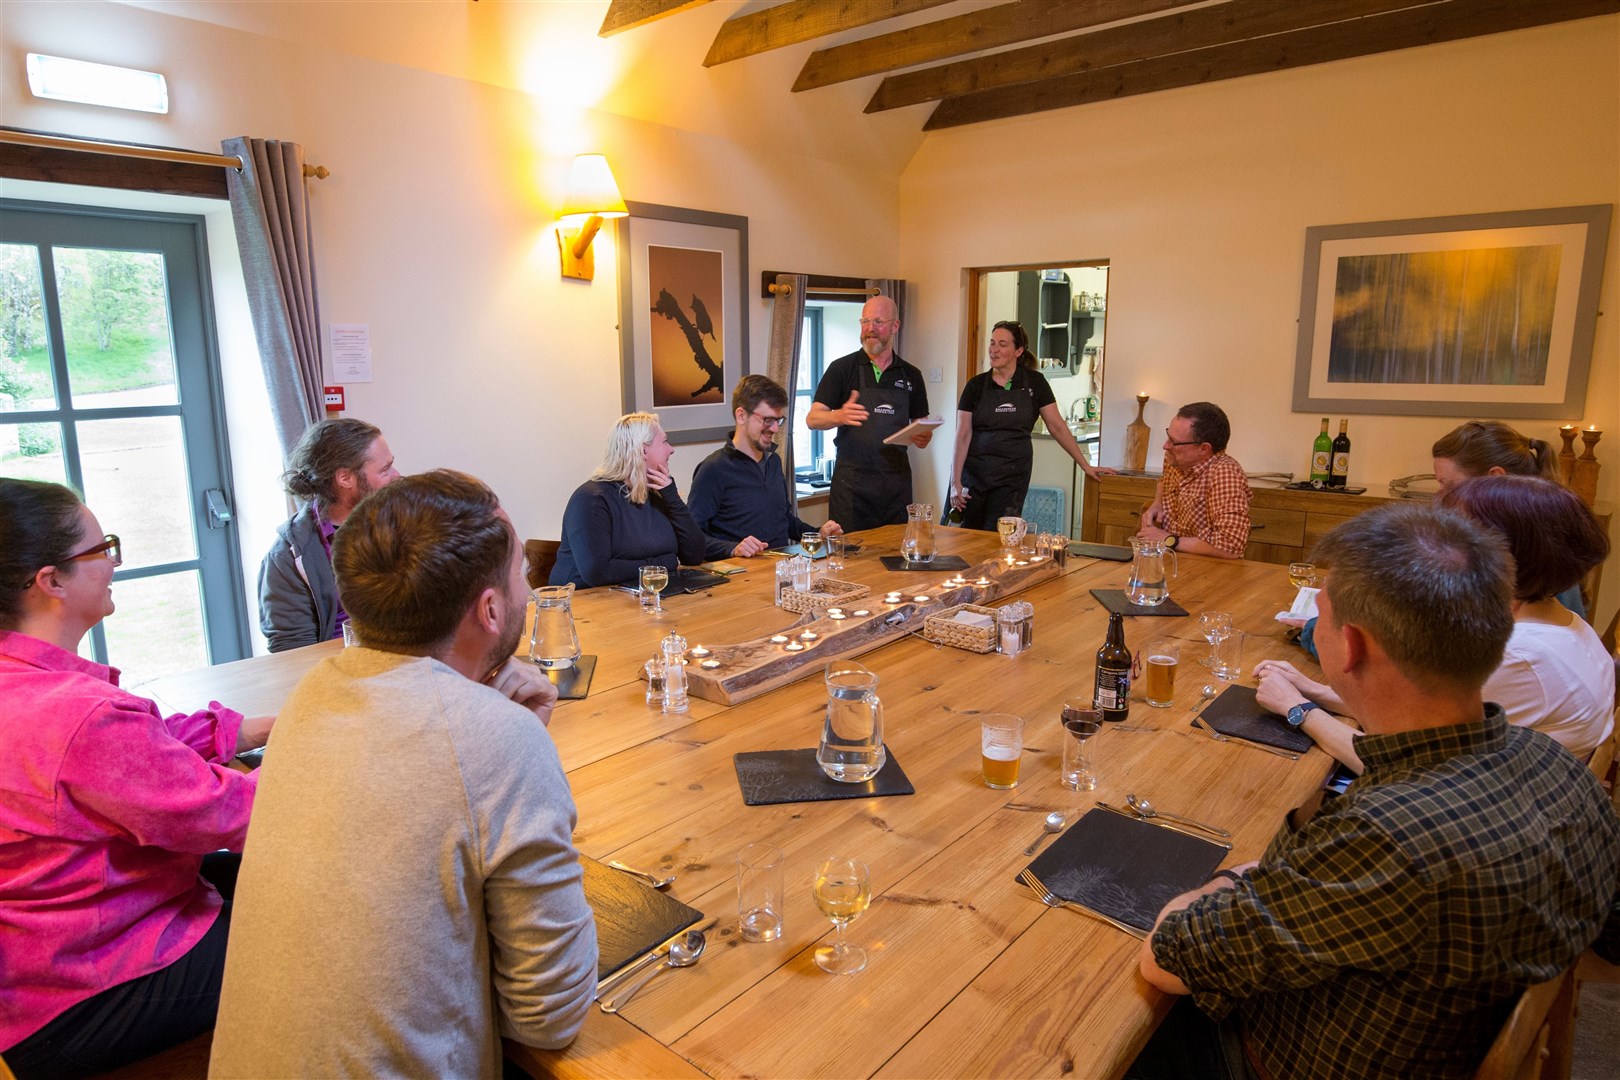 SCOTLAND: The Big Picture rewilding journey group at dining table with Ballintean catering team, Brian Munro and Wendy Sylvester, Cairngorms National Park, Scotland.